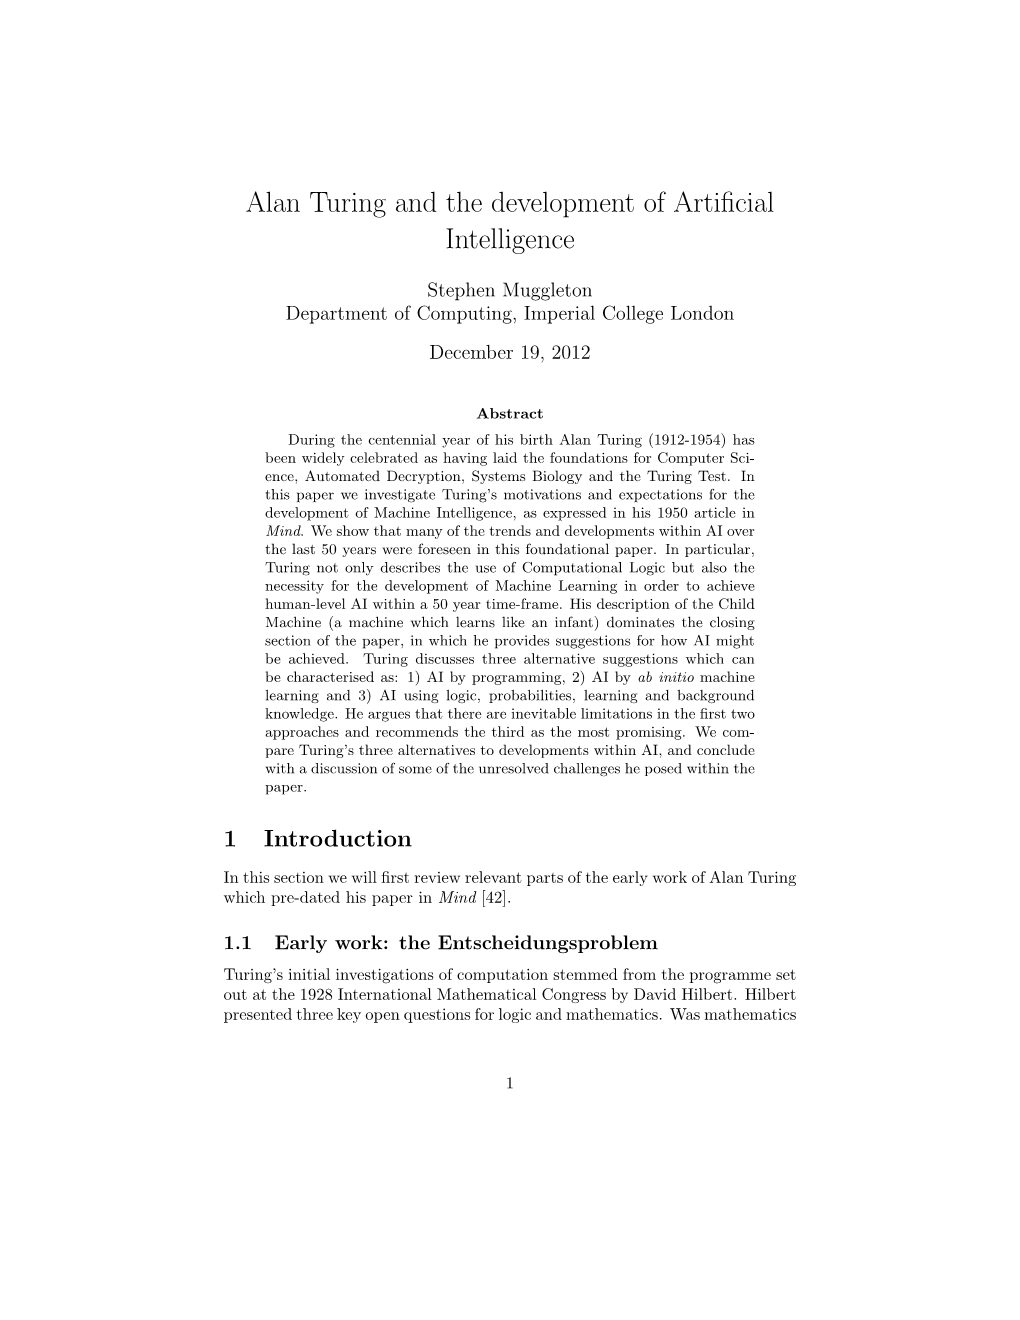 Alan Turing and the Development of Artificial Intelligence